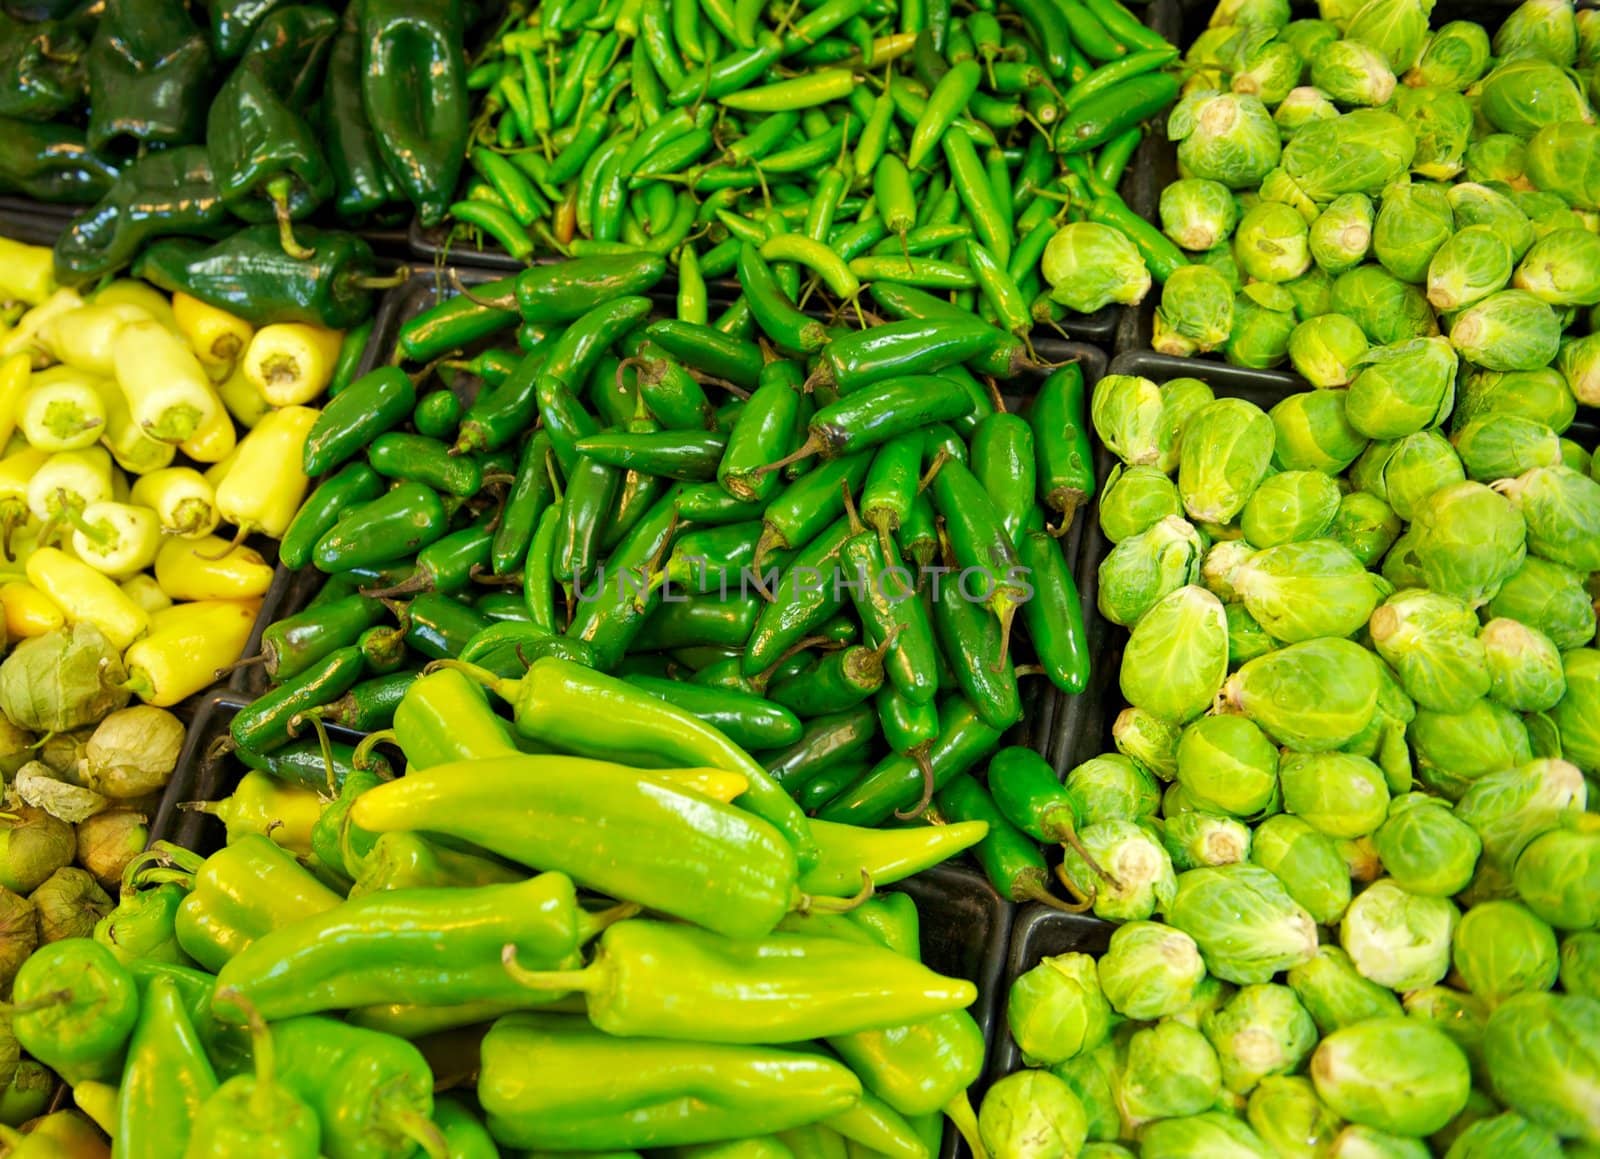 A grocery store's produce section with bins overflowing with chilies, peppers and brussel sprouts